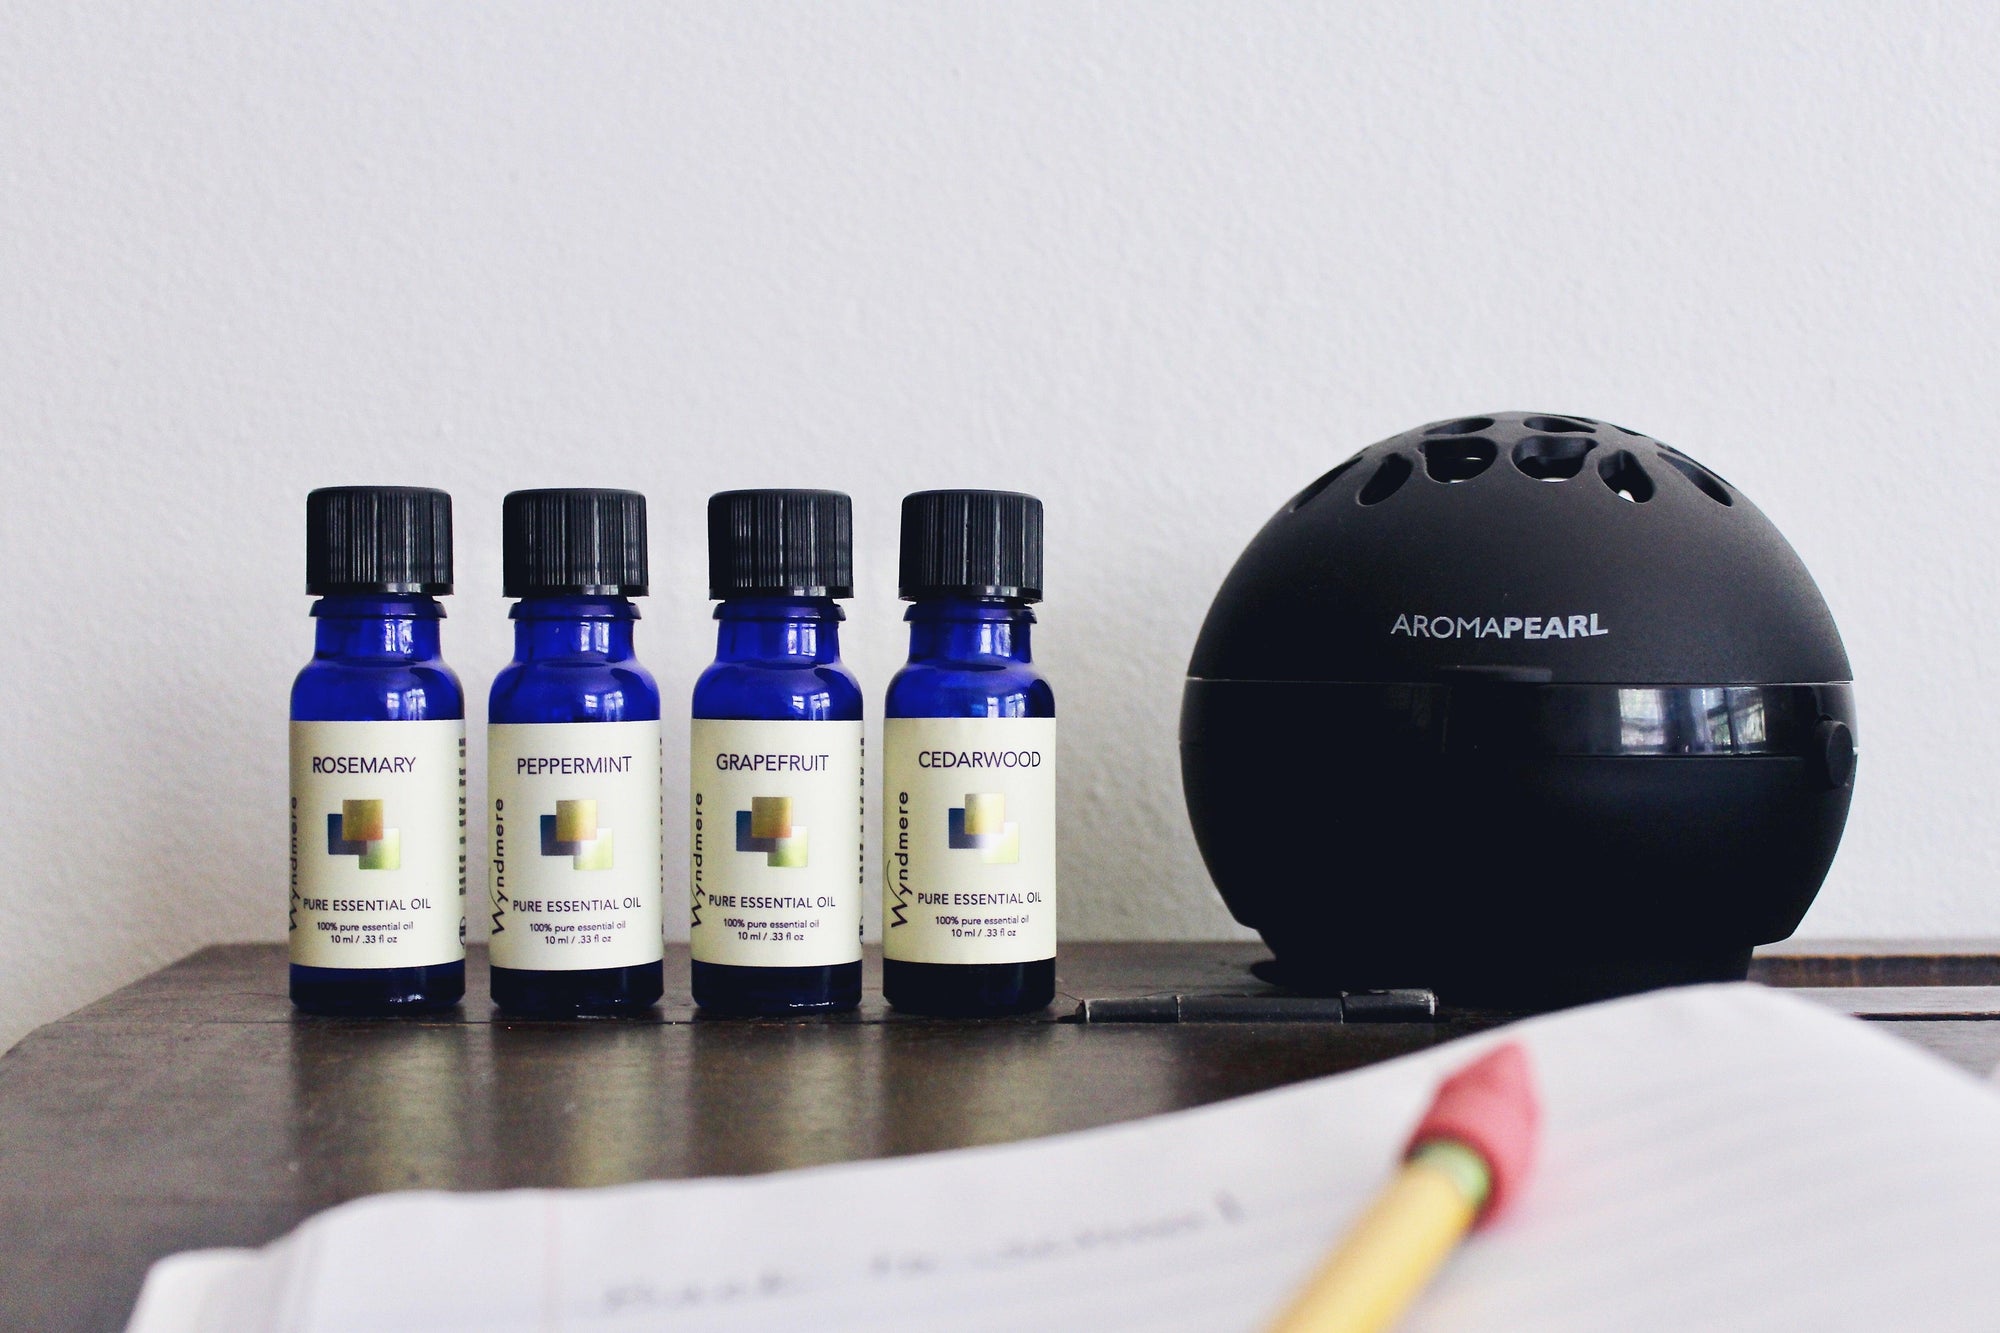  Aromatherapy Tips for Calming the Nerves and anxiety associated with the school year.